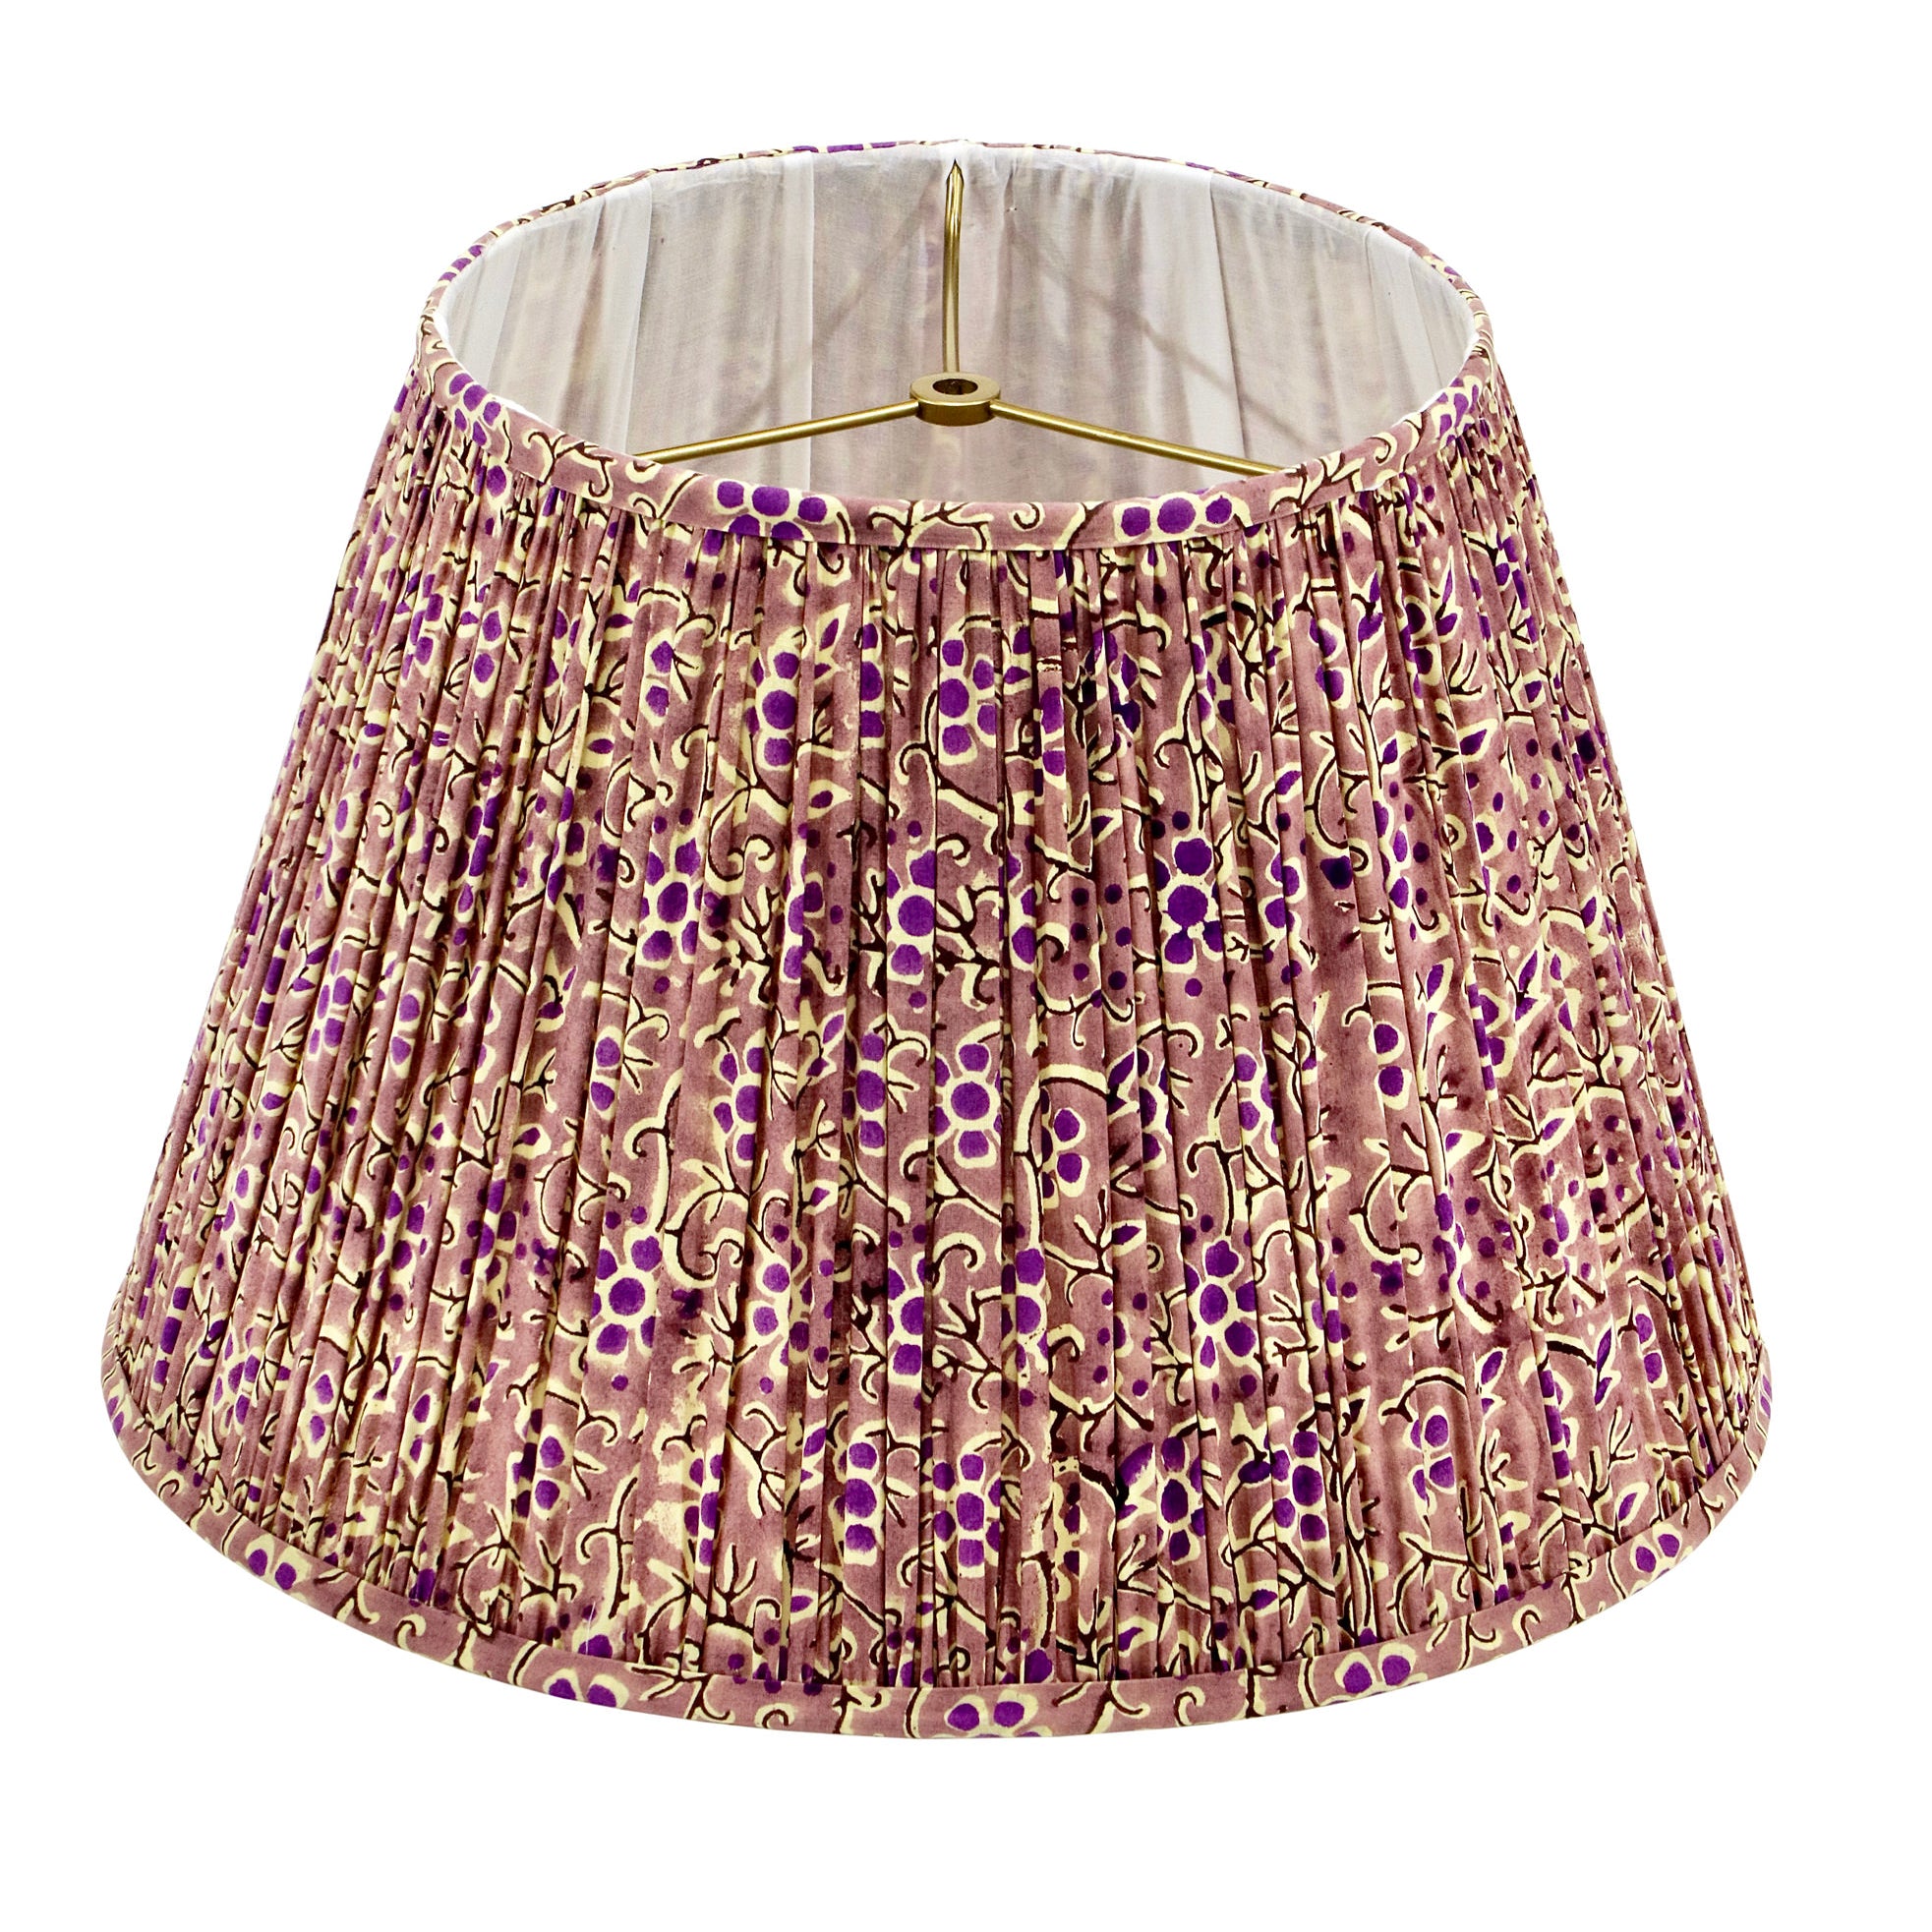 Evelyn / Violet and Purple Flowered Pleated Empire Lamp Shade